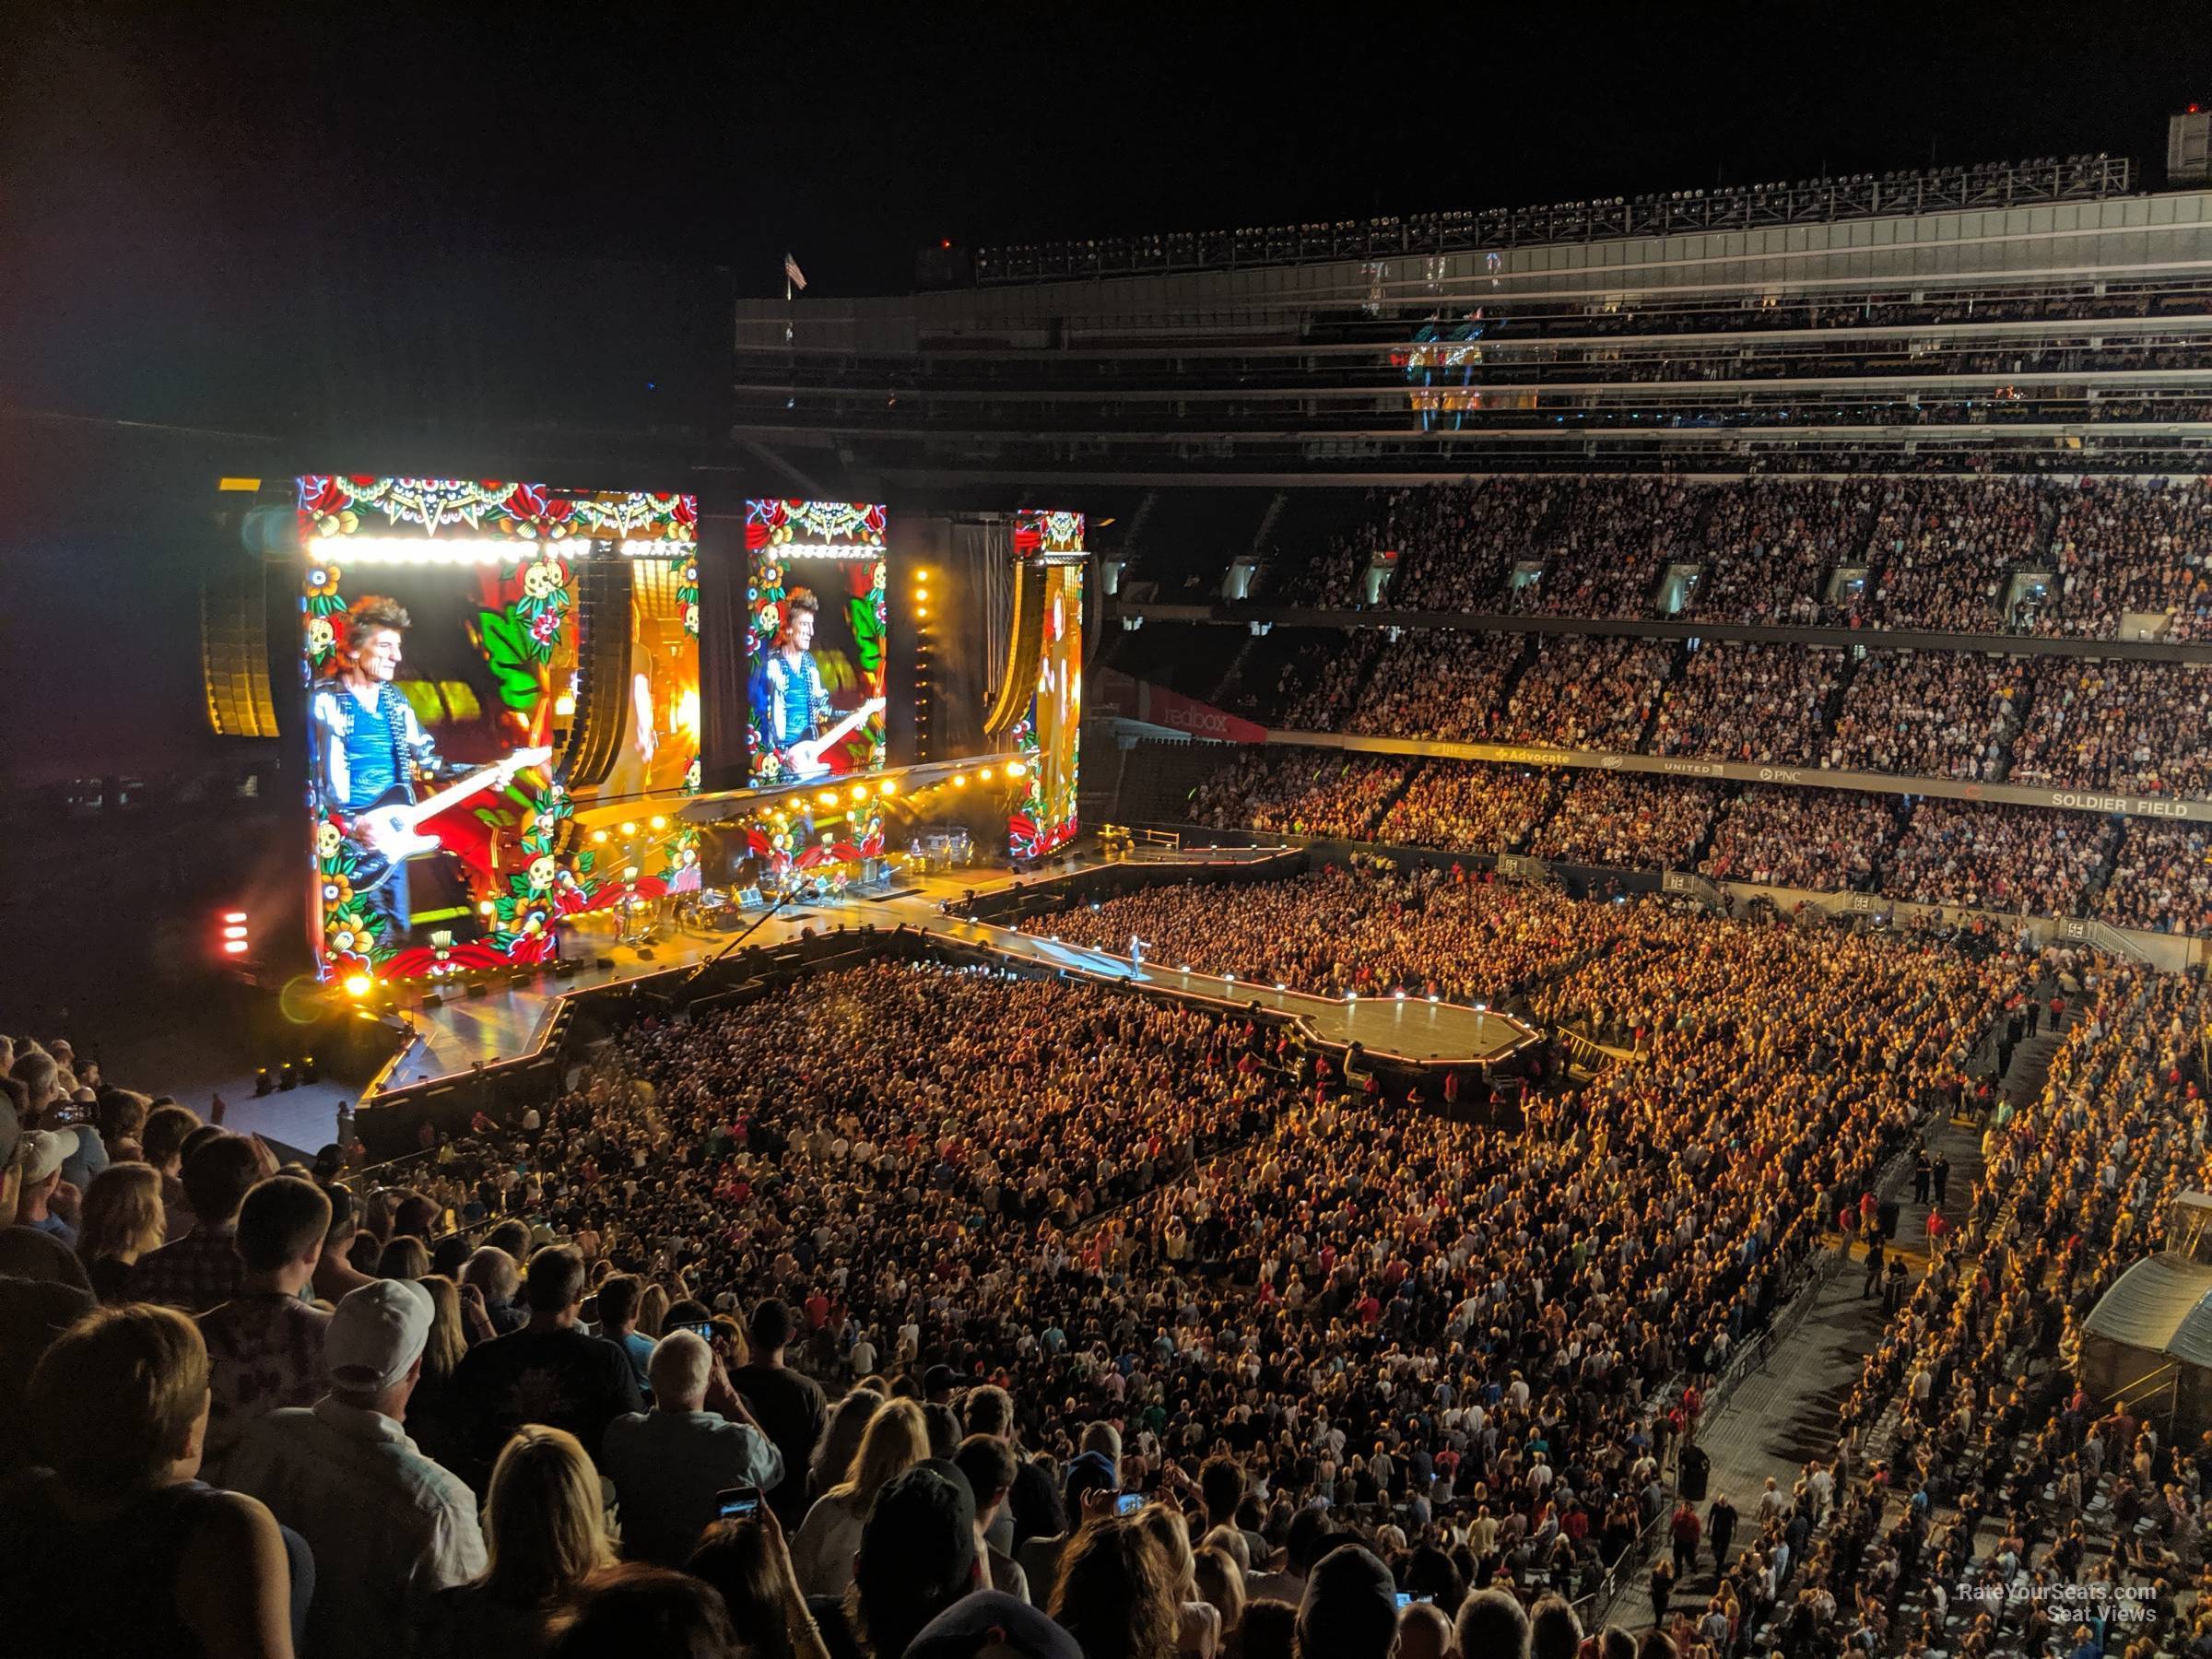 section 336, row 15 seat view  for concert - soldier field